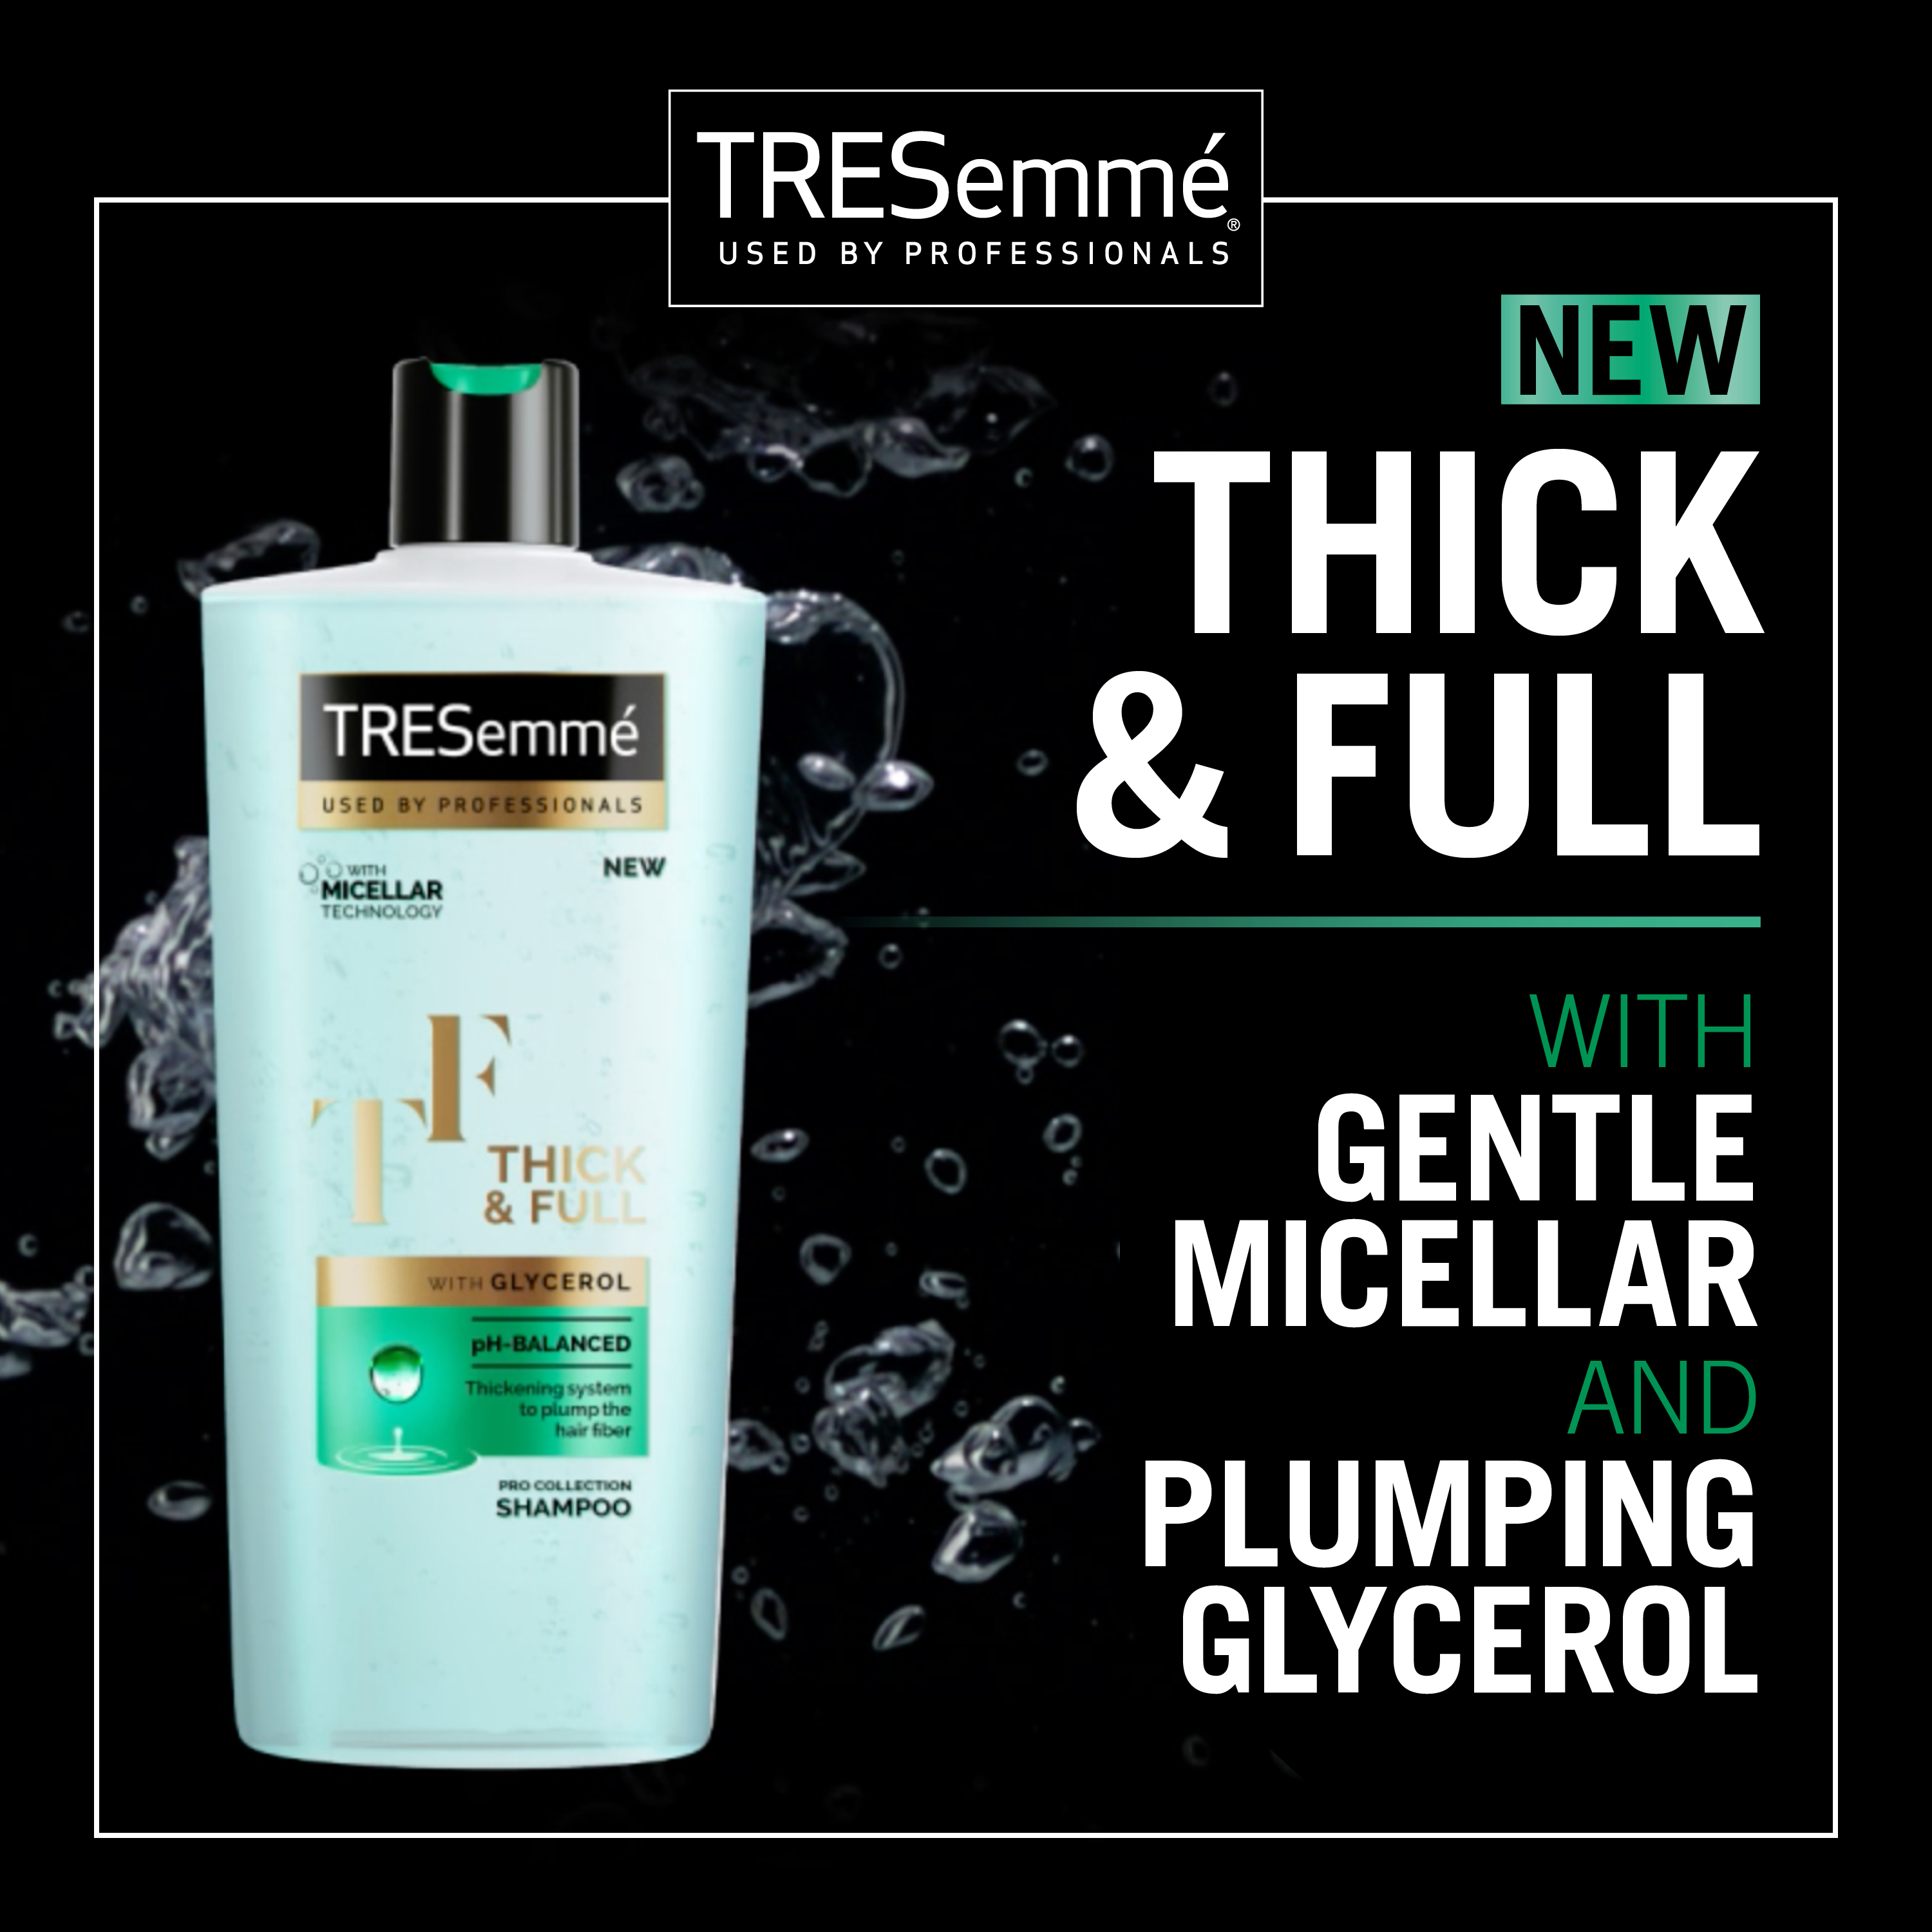 Tresemme Pro Collection Shampoo Thick and Full, 22 oz - image 3 of 9